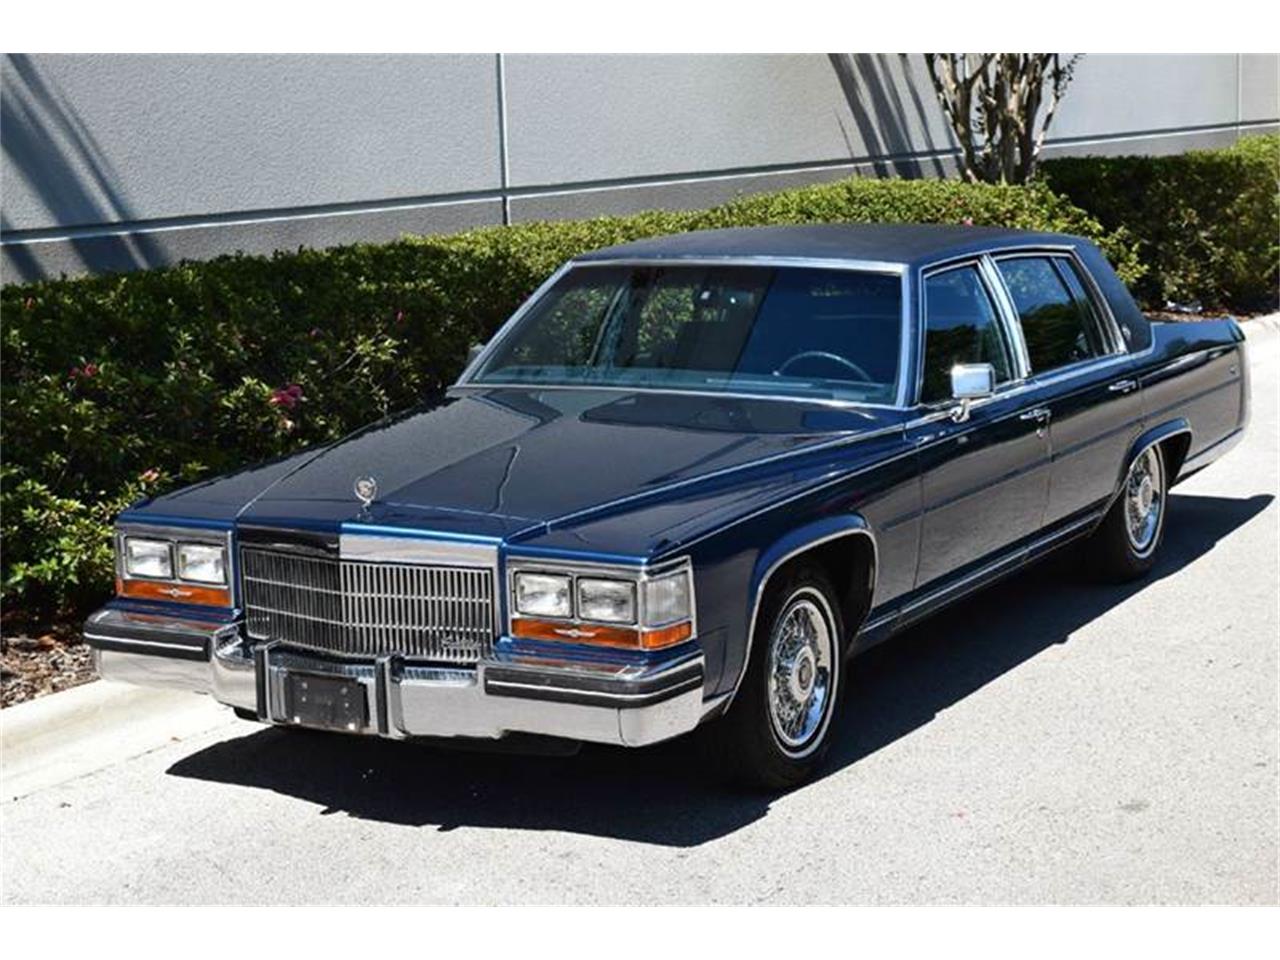 1989 Cadillac Fleetwood Brougham For Sale Classiccars Com